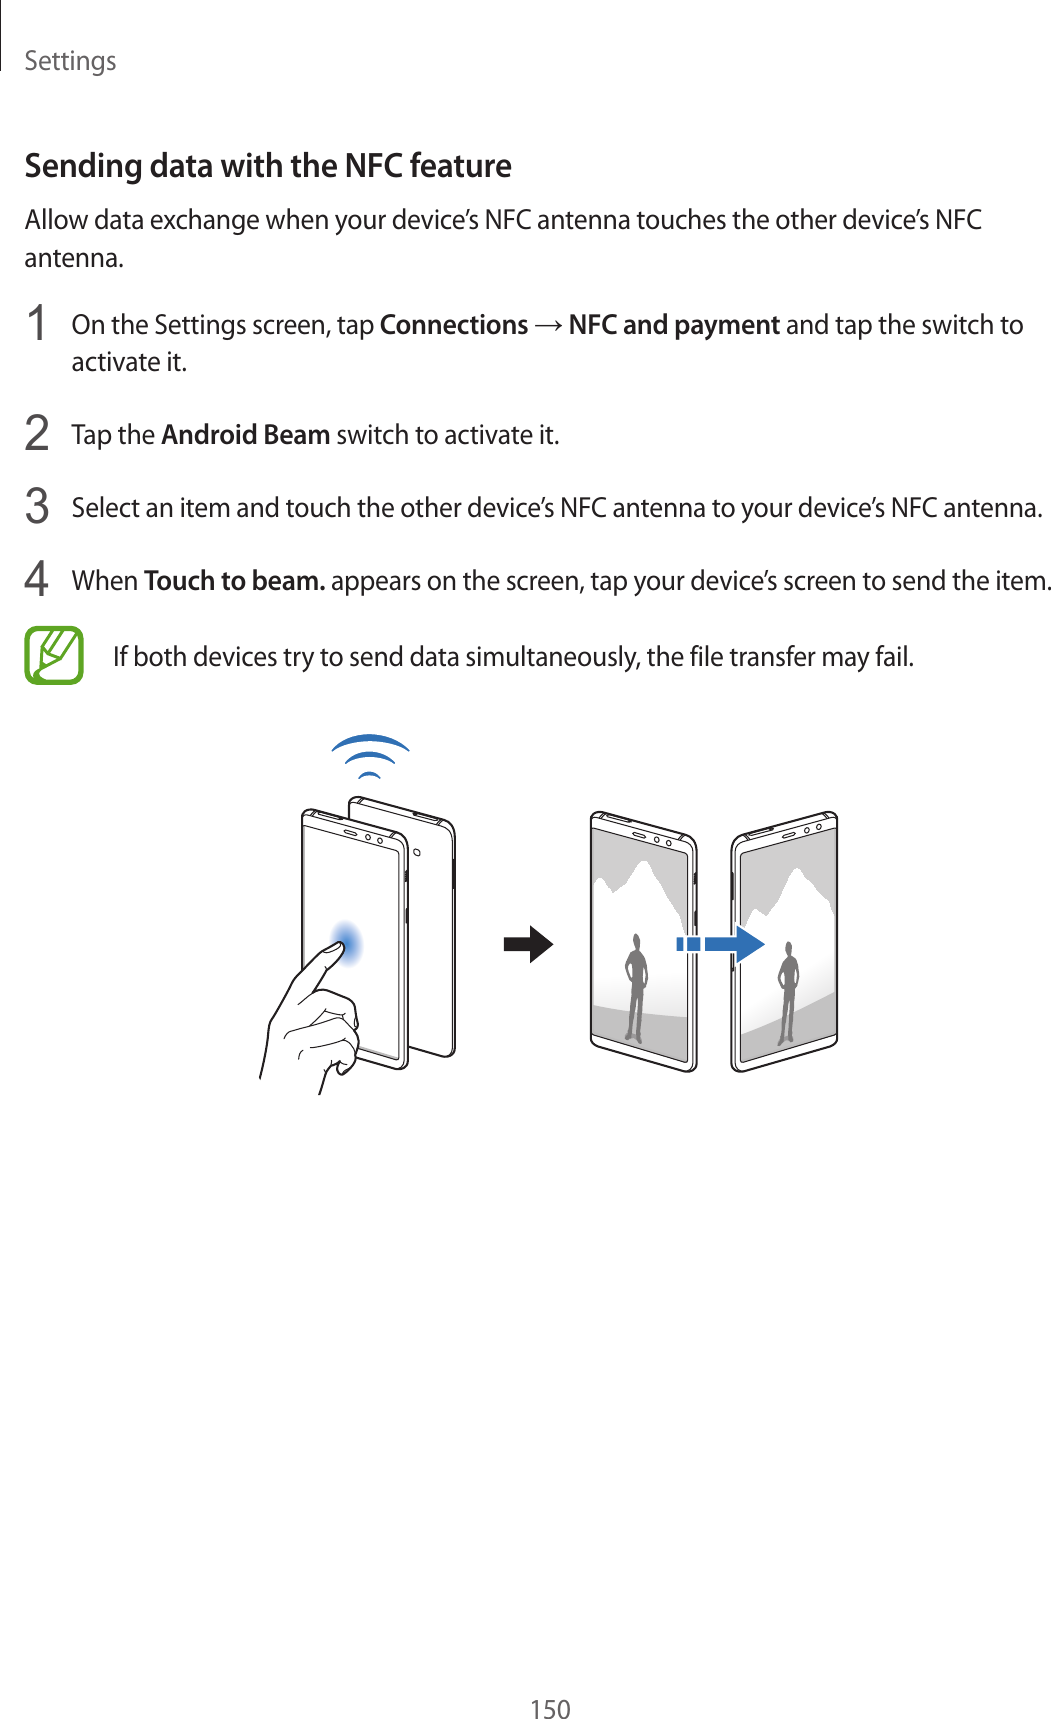 Settings150Sending data with the NFC featureAllow data exchange when your device’s NFC antenna touches the other device’s NFC antenna.1  On the Settings screen, tap Connections → NFC and payment and tap the switch to activate it.2  Tap the Android Beam switch to activate it.3  Select an item and touch the other device’s NFC antenna to your device’s NFC antenna.4  When Touch to beam. appears on the screen, tap your device’s screen to send the item.If both devices try to send data simultaneously, the file transfer may fail.